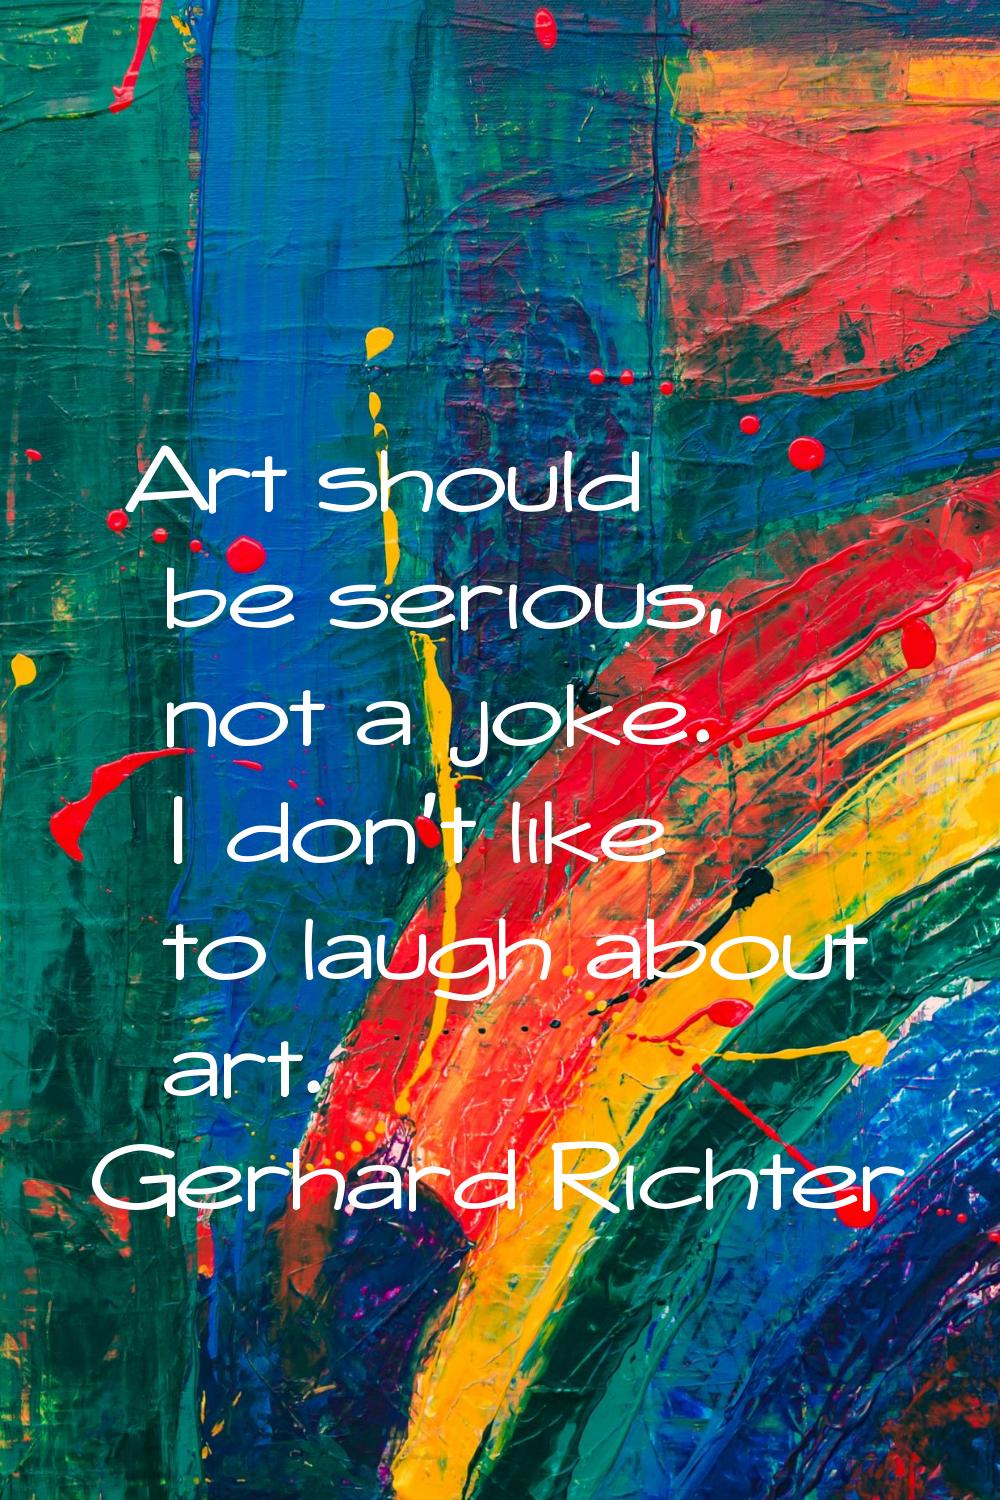 Art should be serious, not a joke. I don't like to laugh about art.